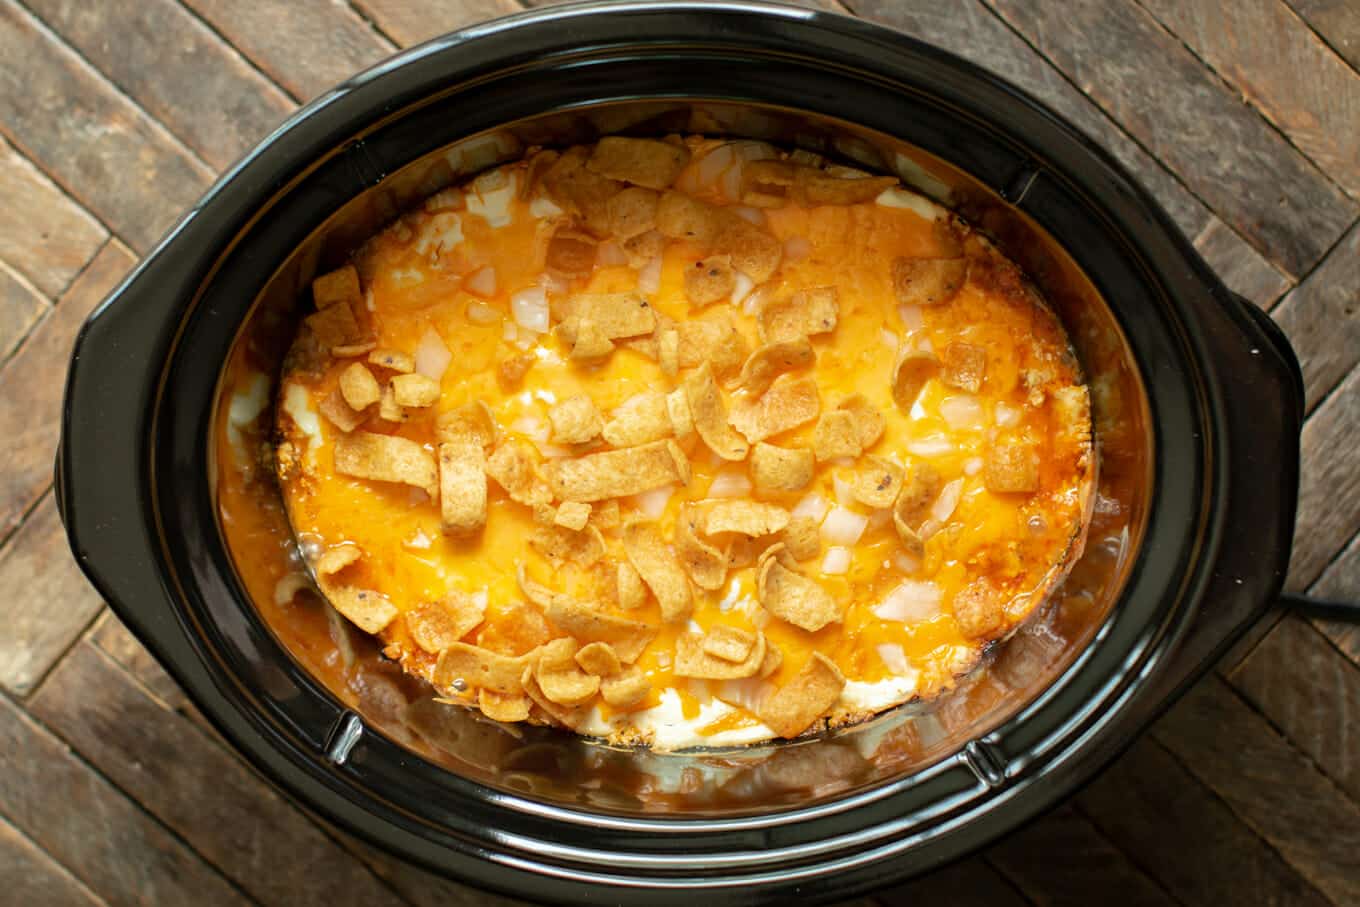 chili, sour cream, cheese, onion and fritos done cooking in a slow cooker.